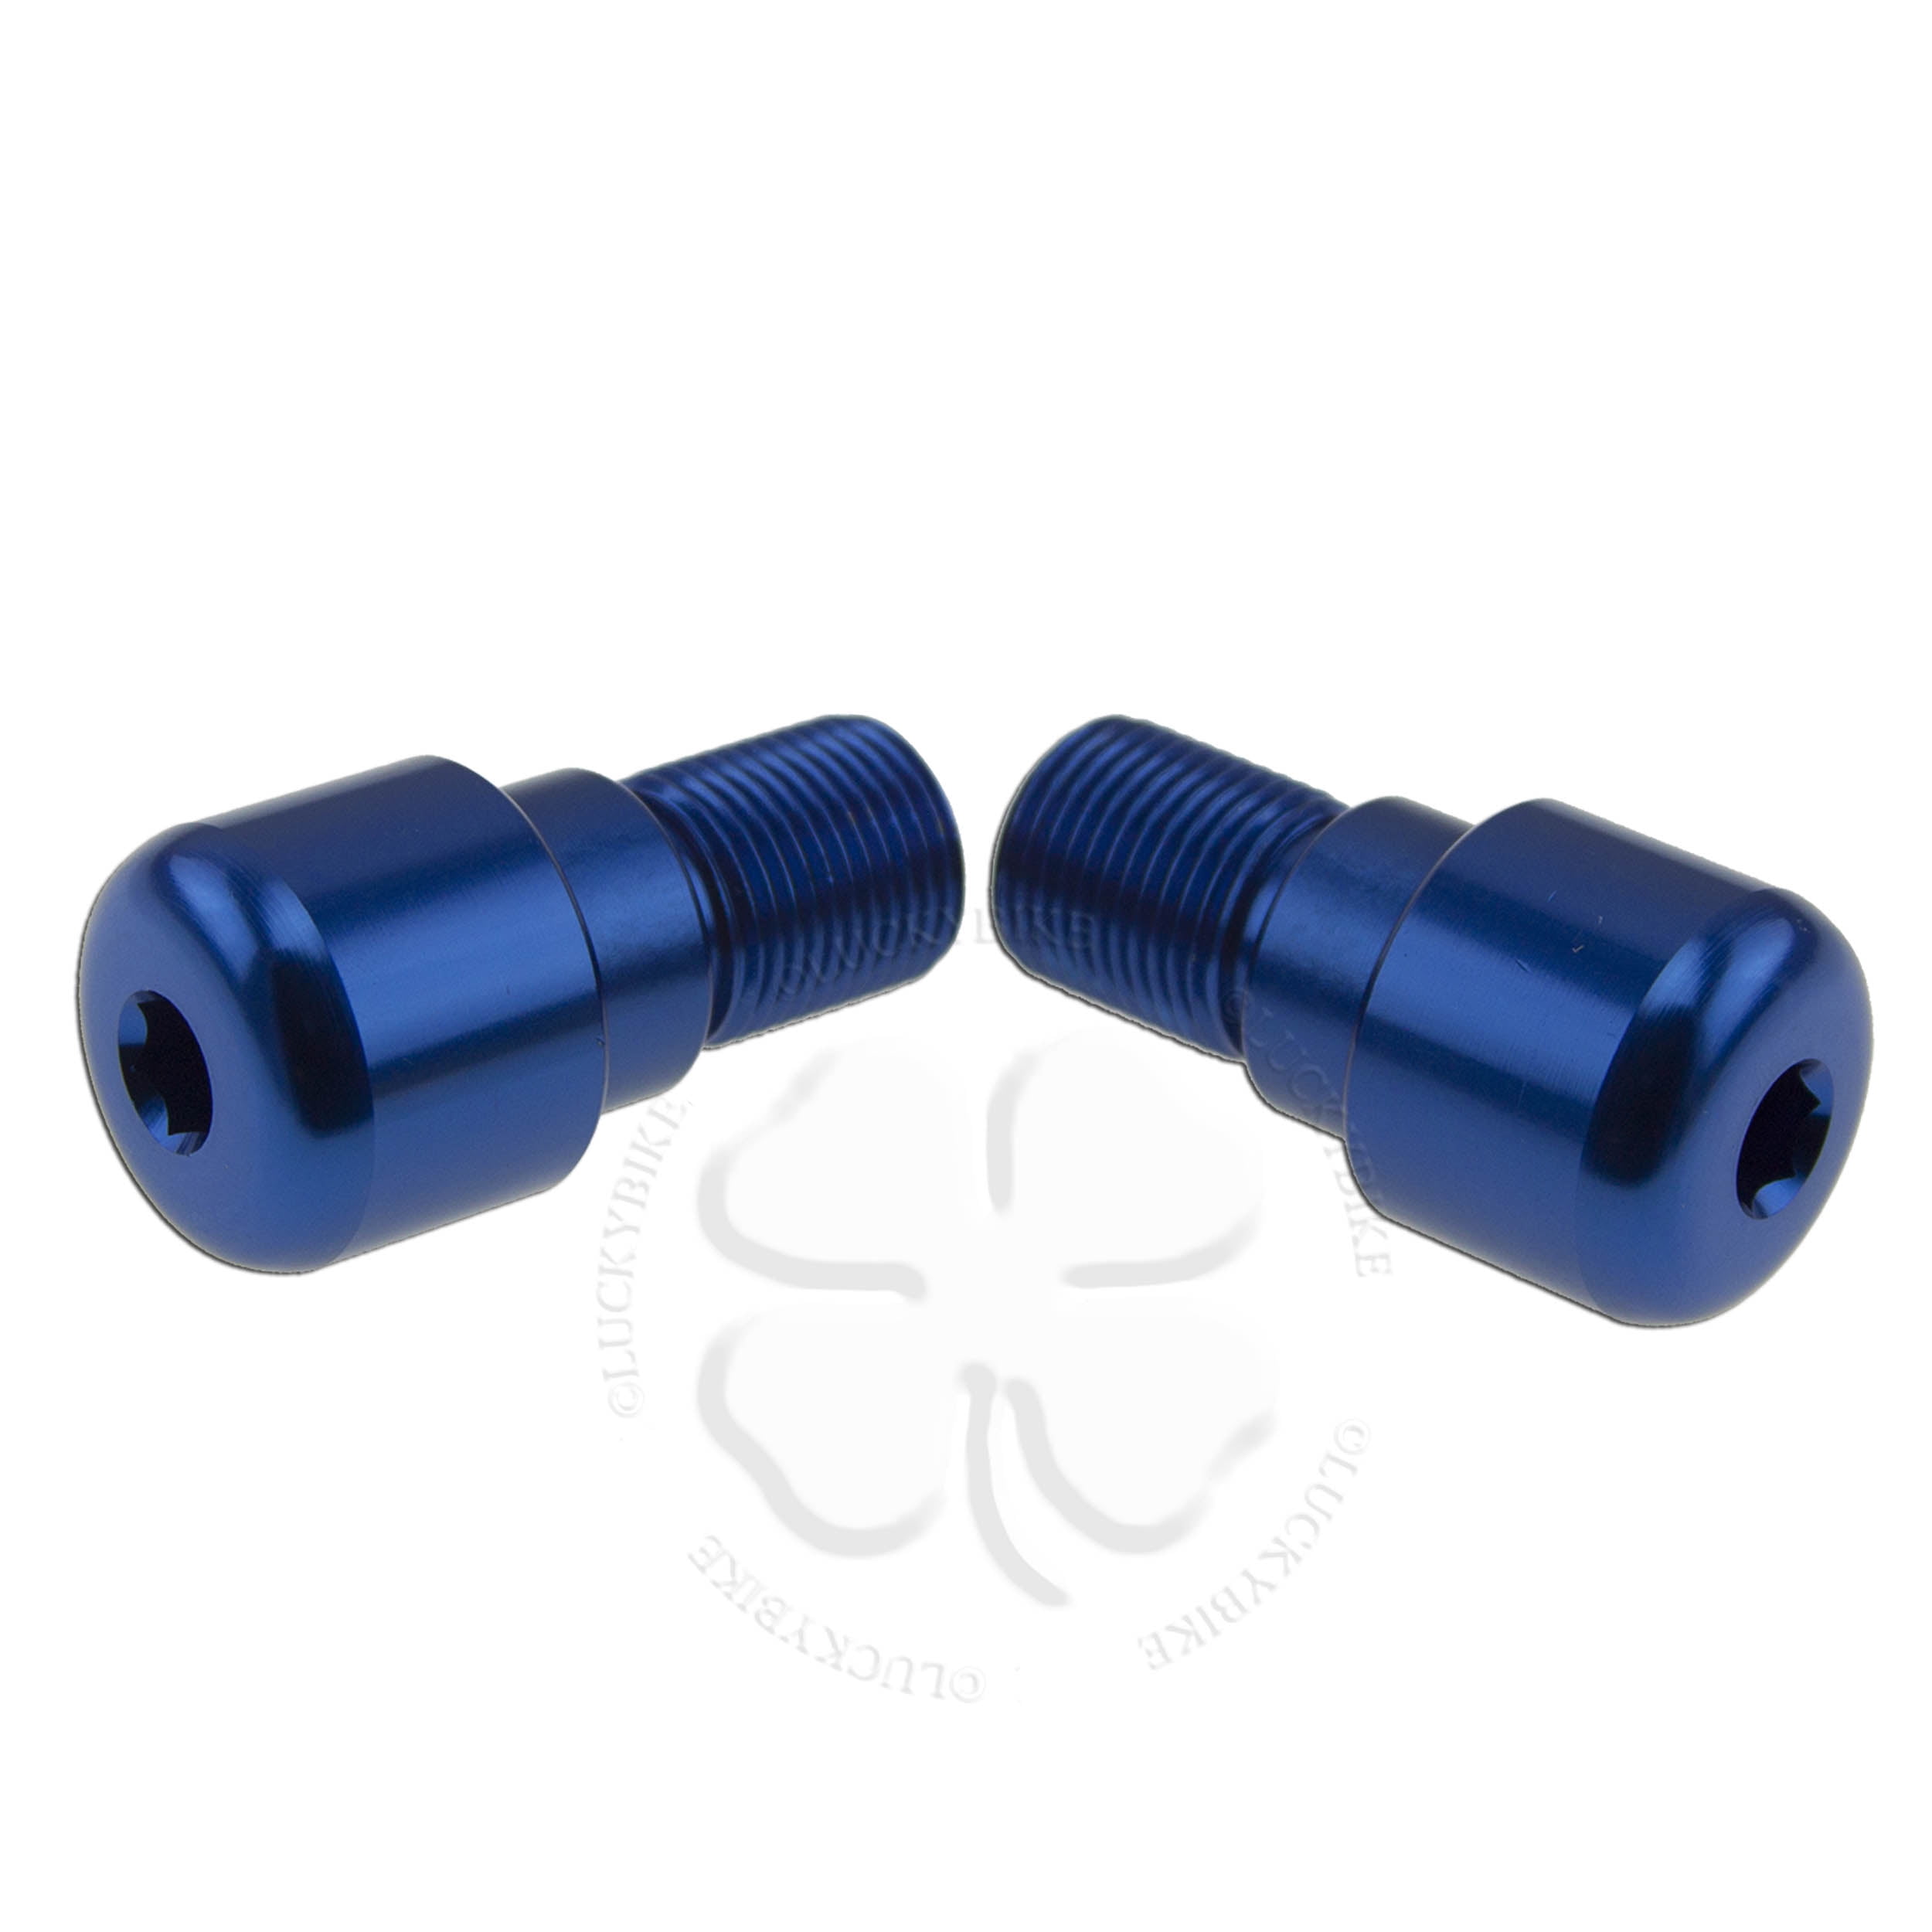 18mm FXCNC Bar Ends Grips Plugs Aluminum Handle For Yamaha YZF R6S 06 07 08 09 